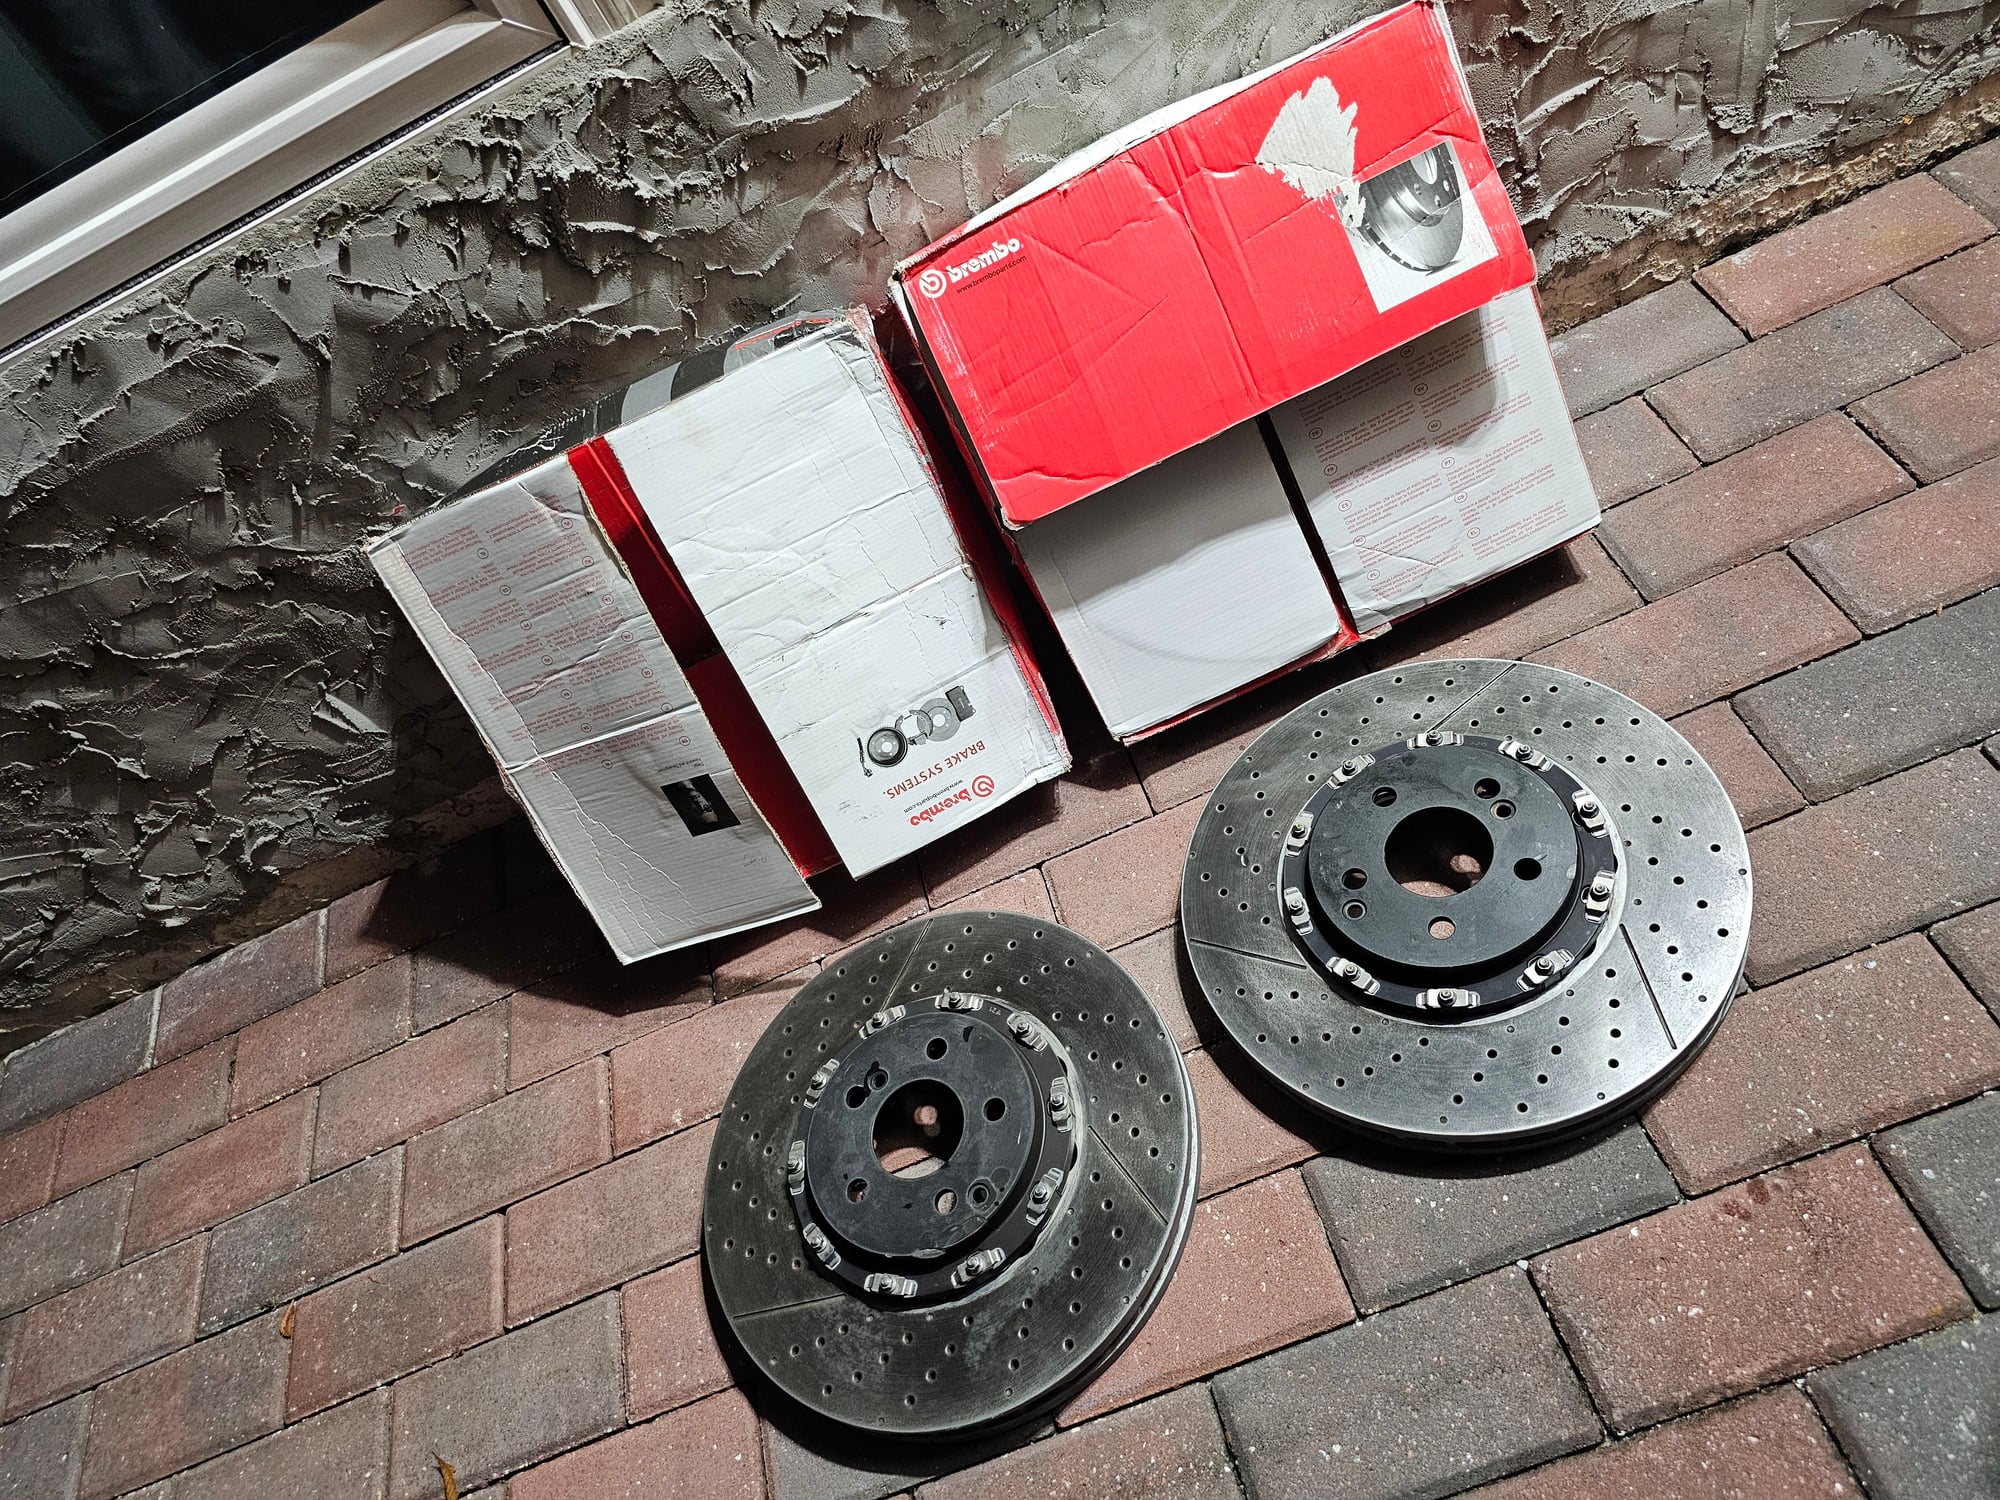 Brakes - Mercedes AMG Brake 2pc rotor - Brembo 2194210212 - Used - All Years  All Models - Clearwater, FL 33759, United States